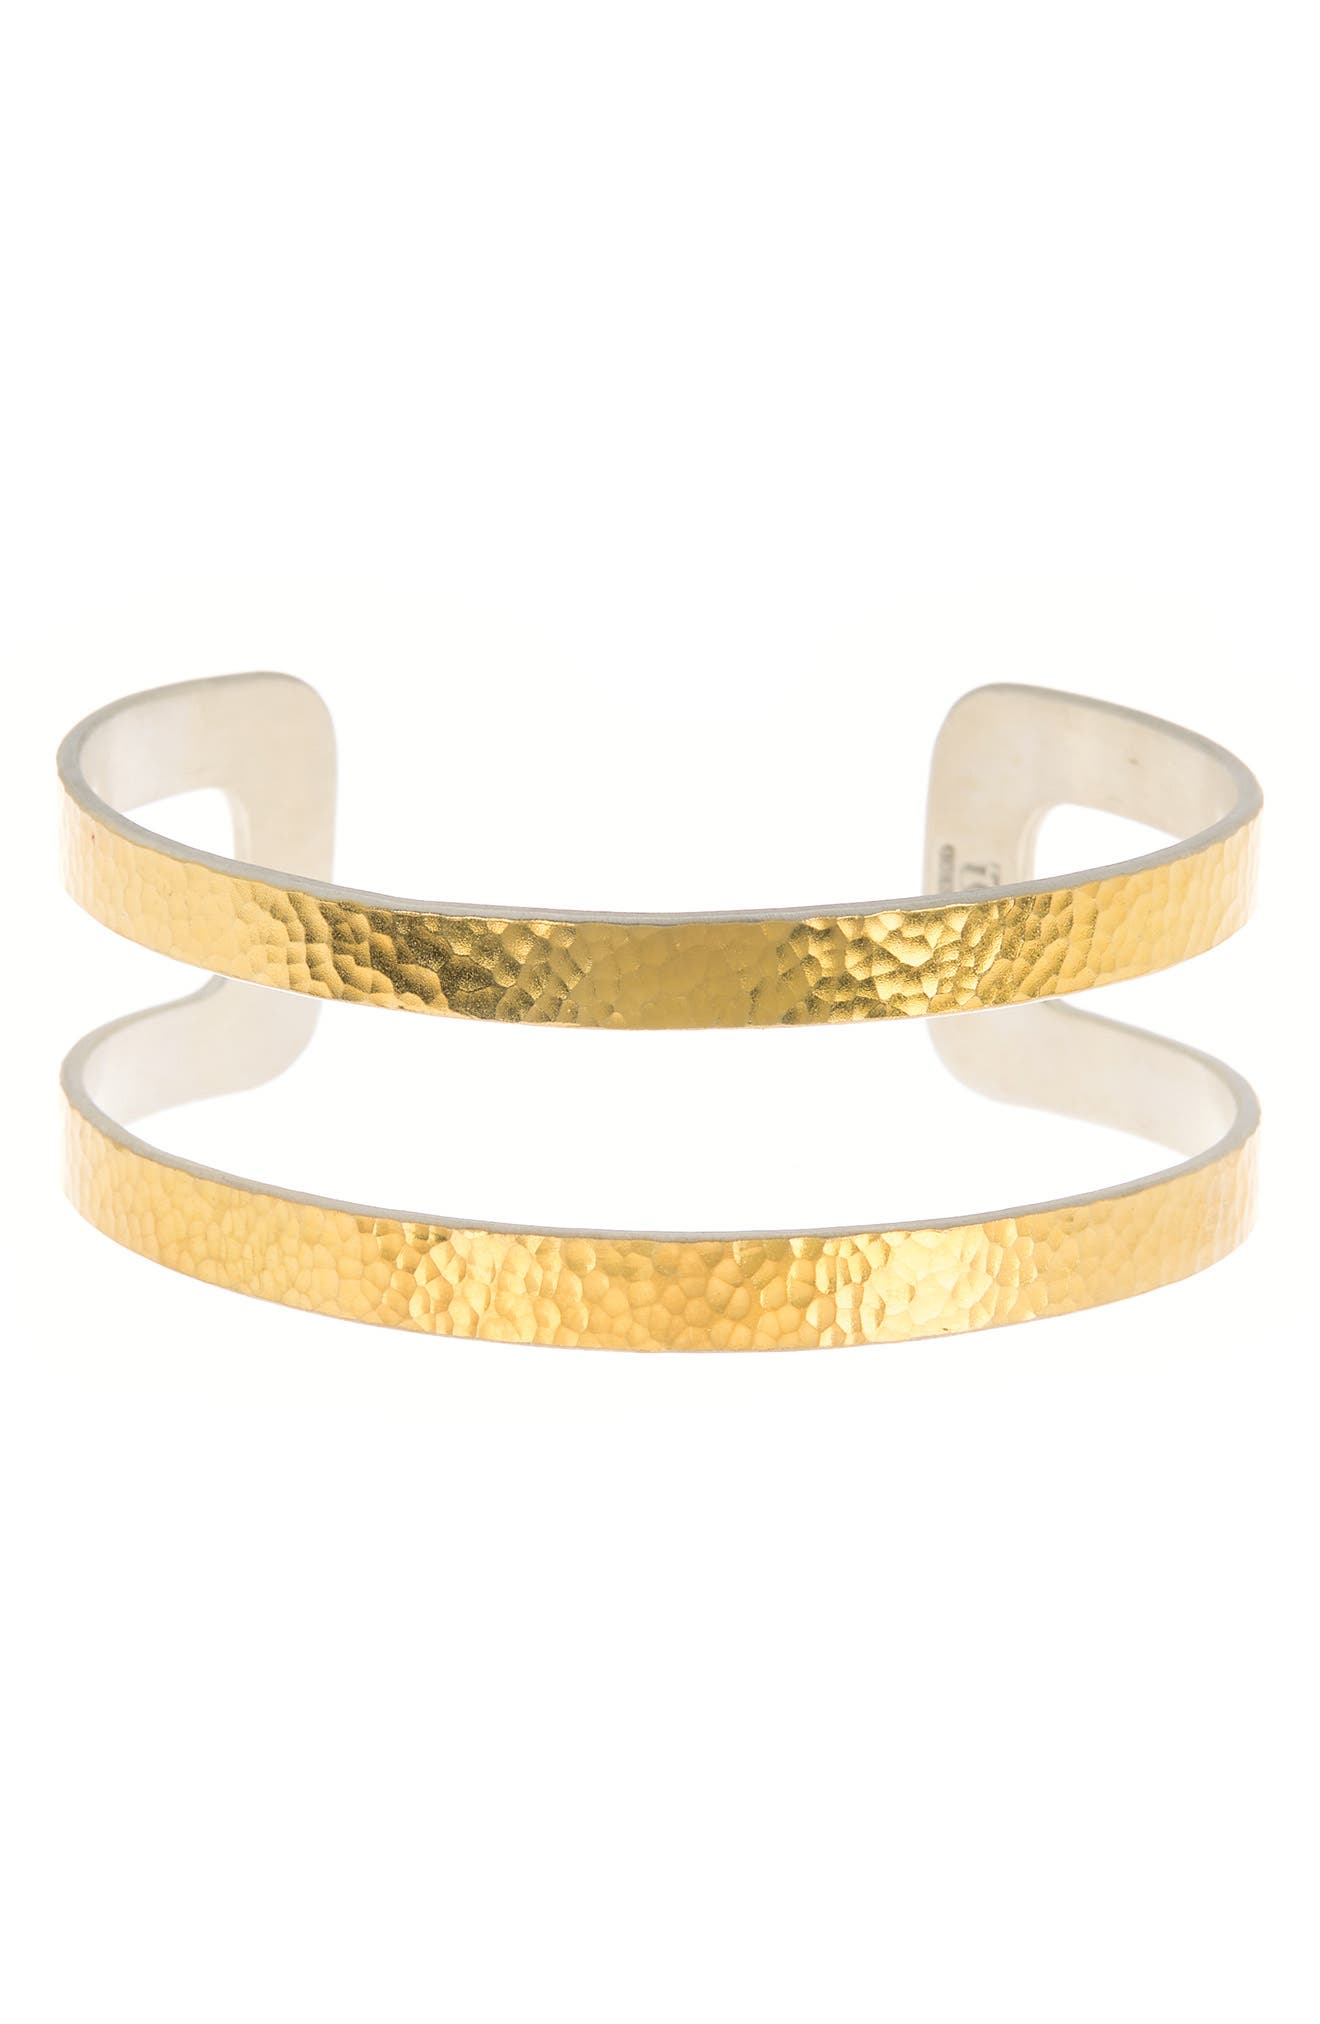 Gurhan Mango 24k Gold Plated Sterling Silver Hammered Double Row Cuff Bracelet